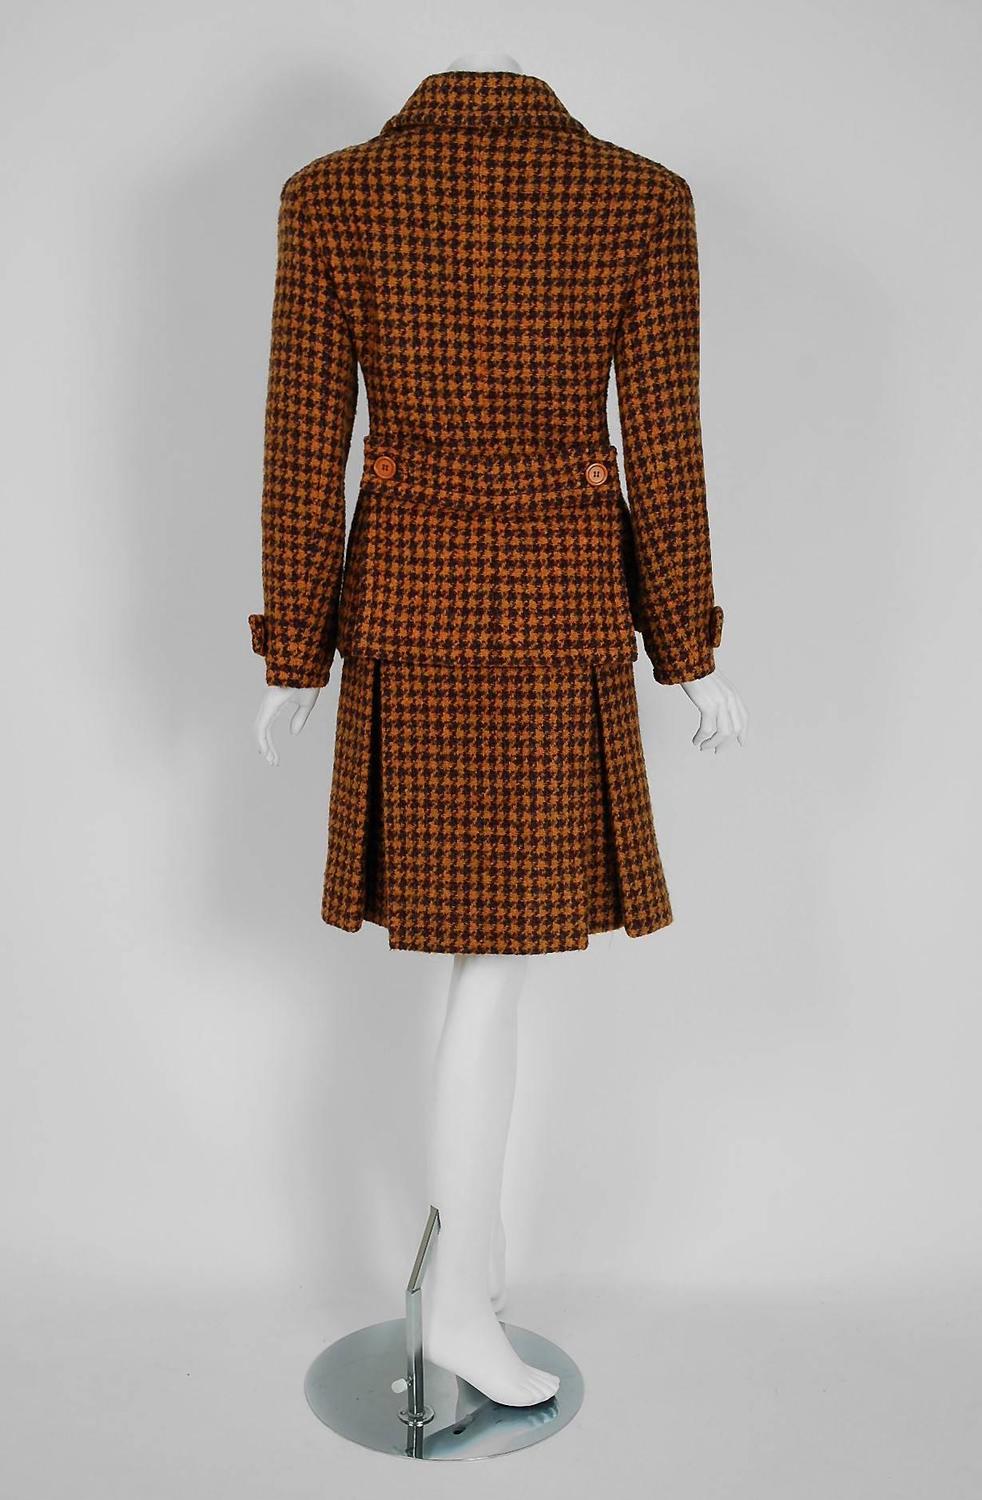 1968 Christian Dior Haute-Couture Plaid Wool Double-Breasted Mod Skirt